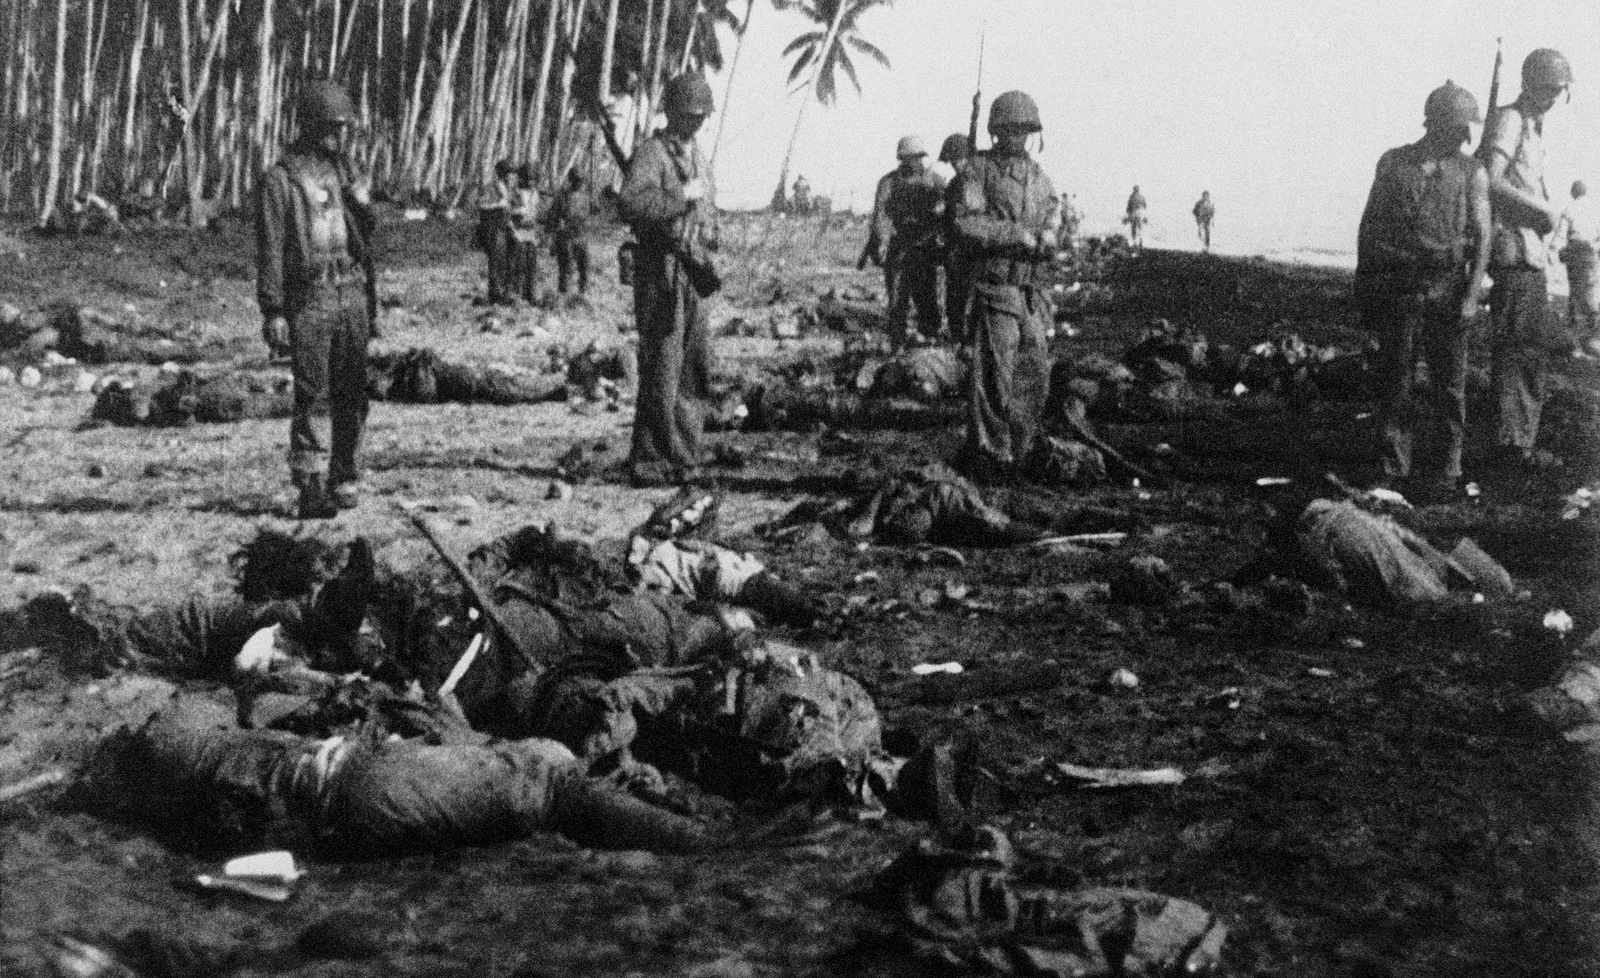 On the shore of Guadalcanal Island, U.S. Marines count Japanese dead after the Marines drove onto the island to take the strategic airport area, Oct. 27, 1942 in Solomon Island. (AP Photo)